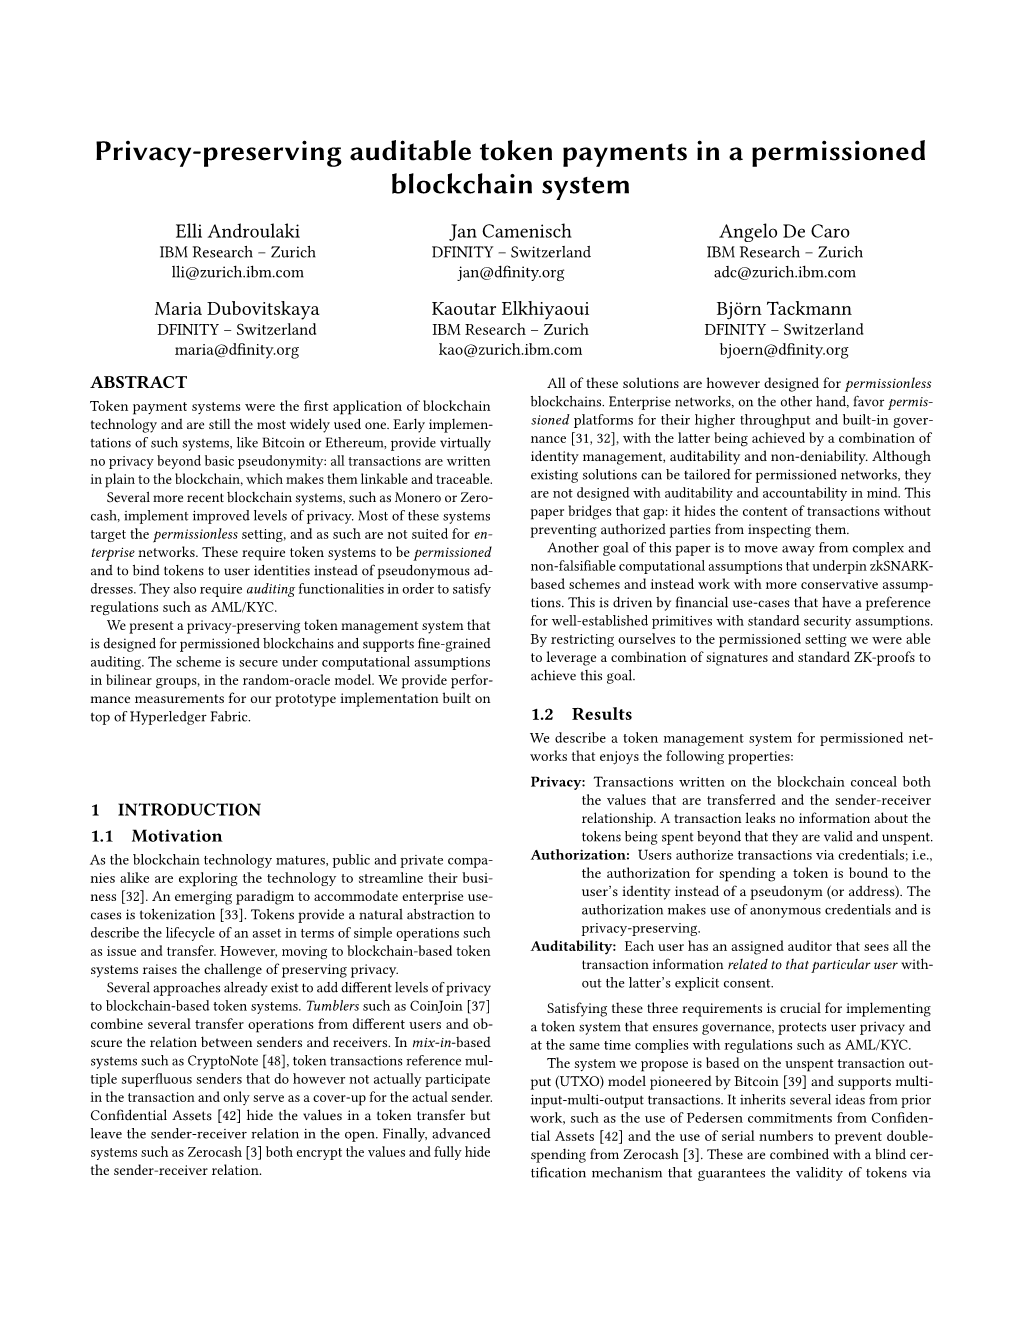 Privacy-Preserving Auditable Token Payments in a Permissioned Blockchain System